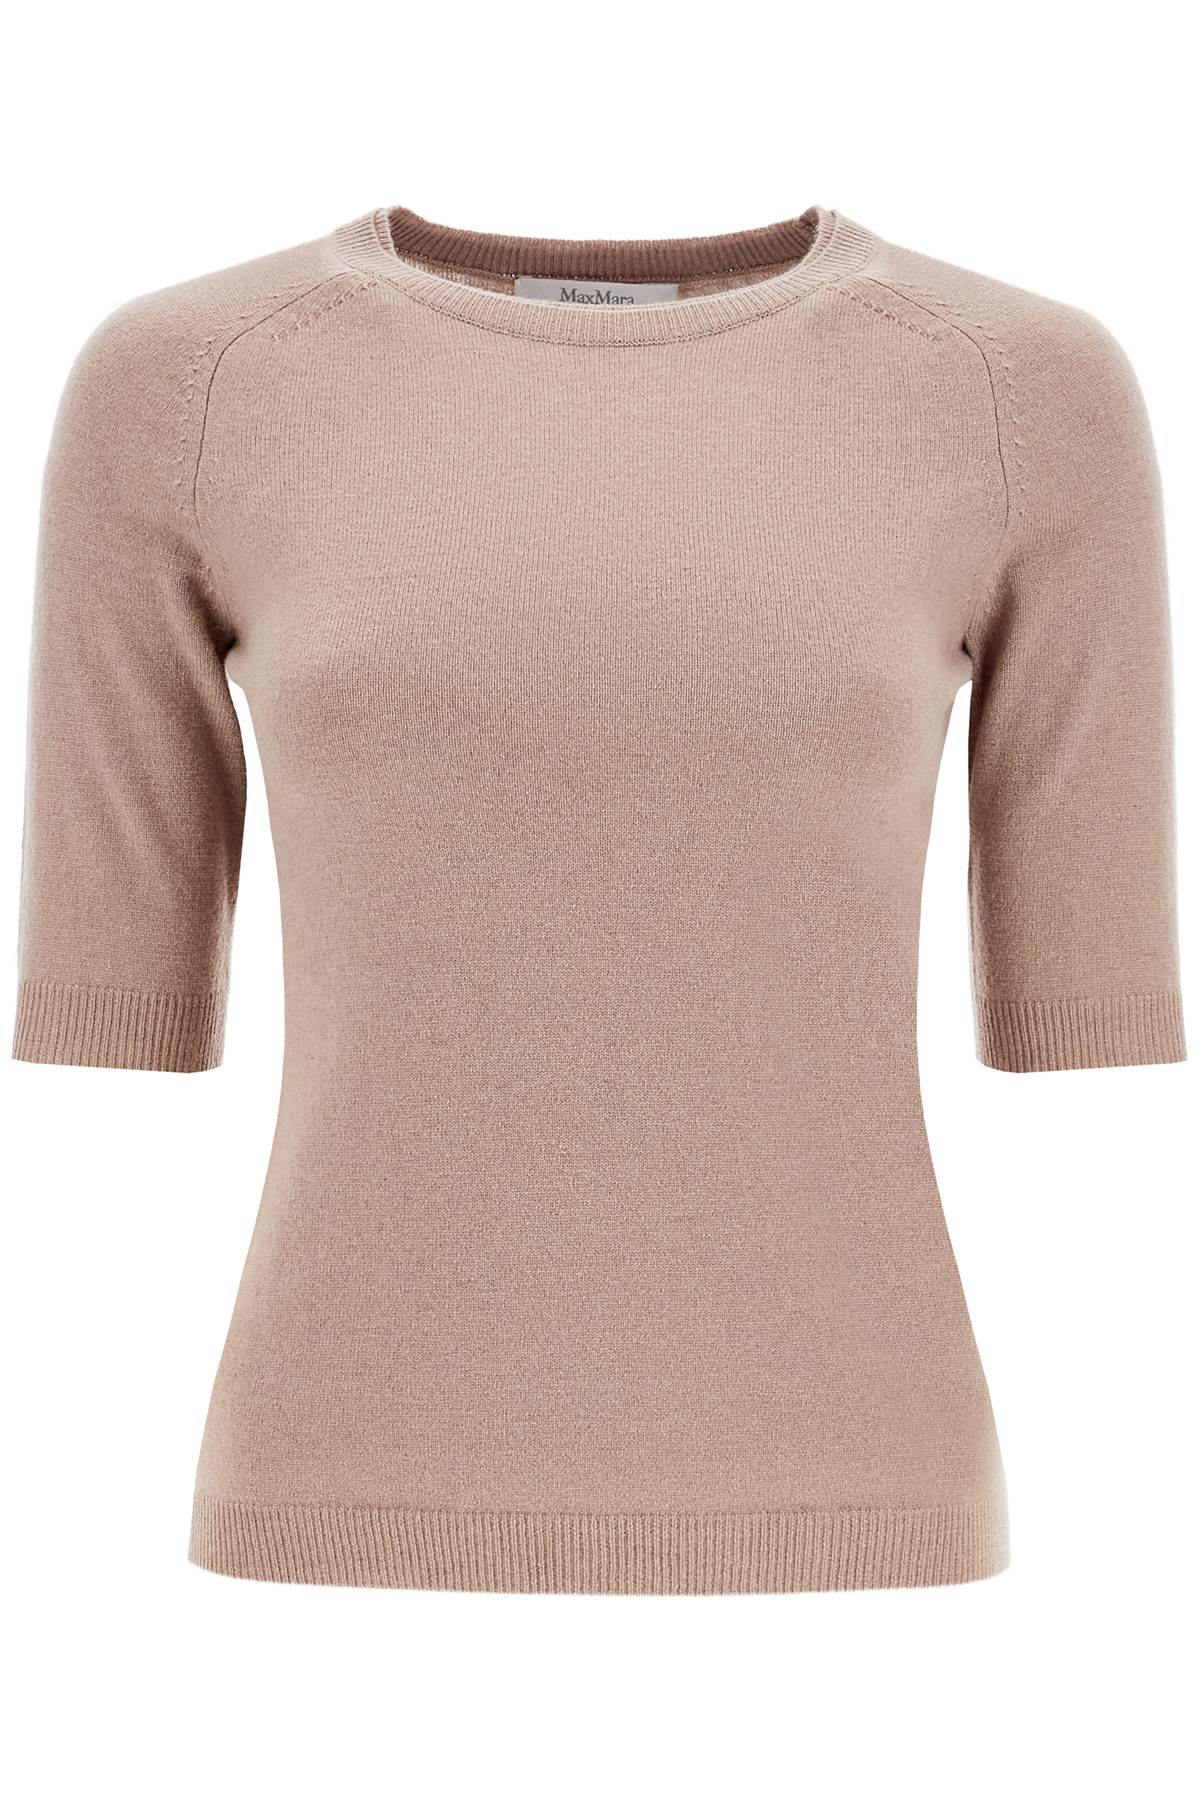 wool And Cashmere Knit Top c